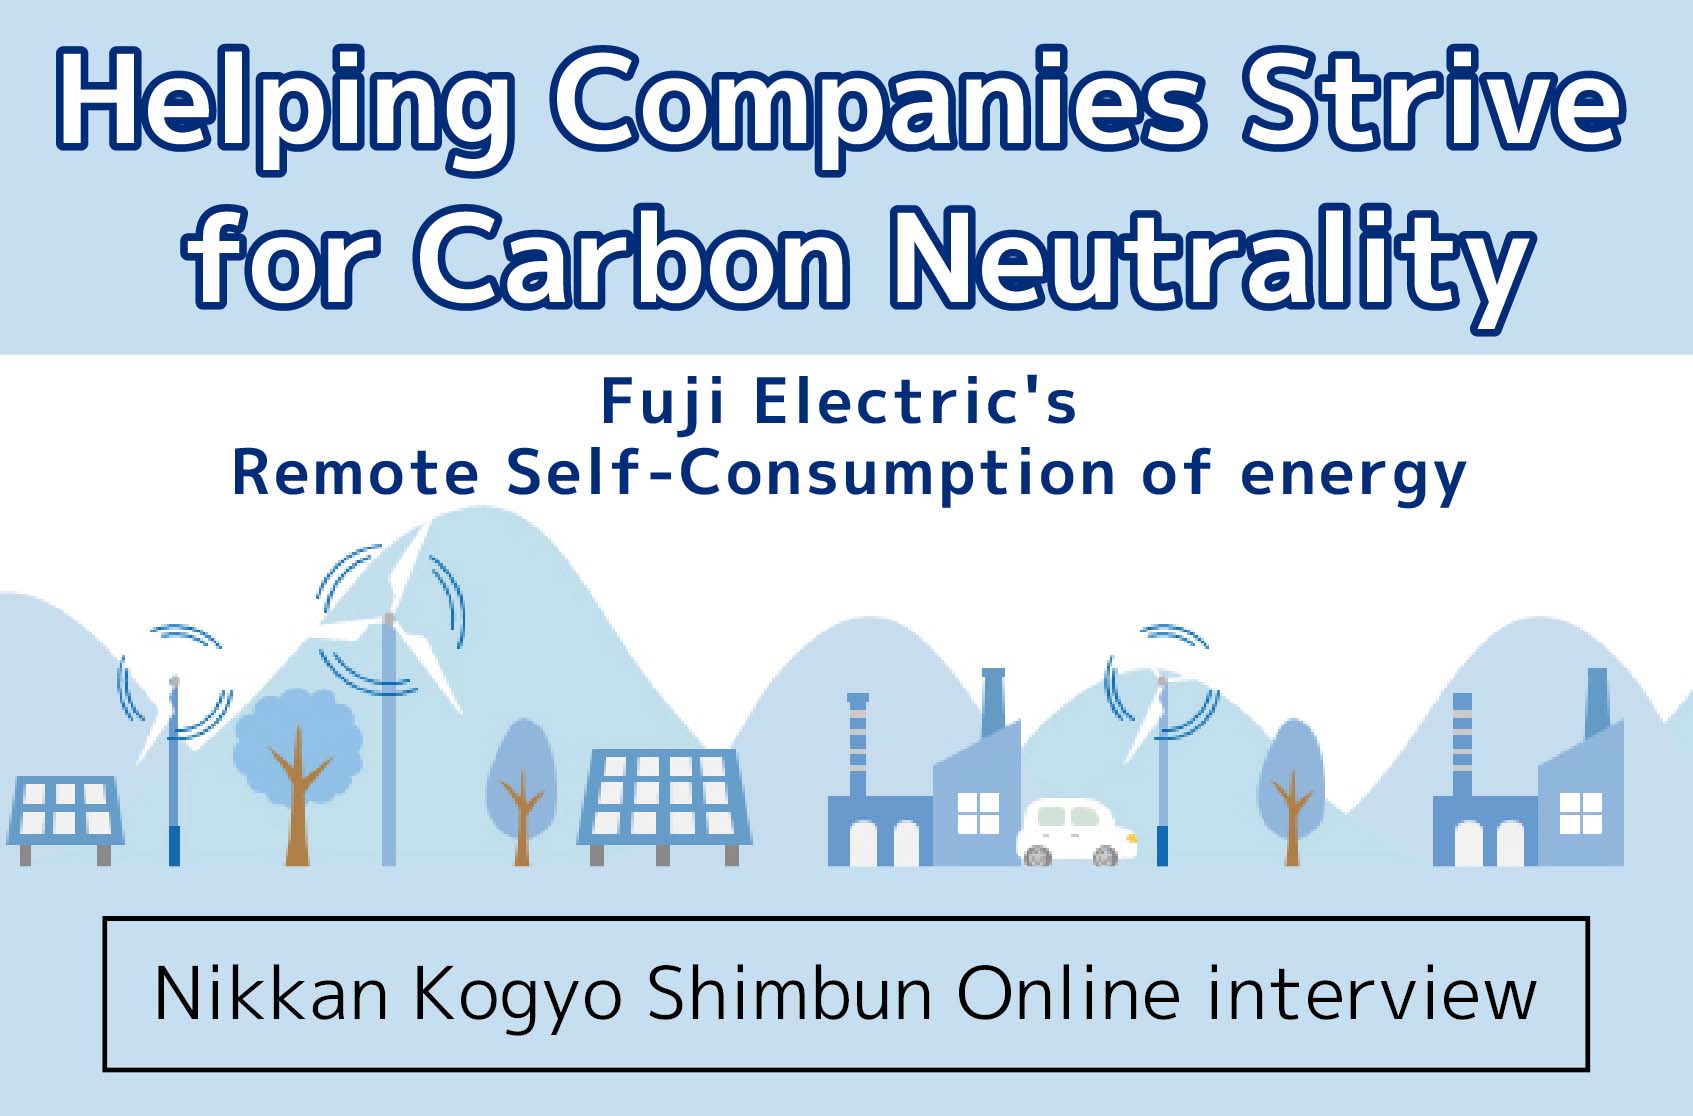 Interview3. Fuji Electric's “Remote Self-Consumption of energy”: Helping Companies Strive for Carbon Neutrality